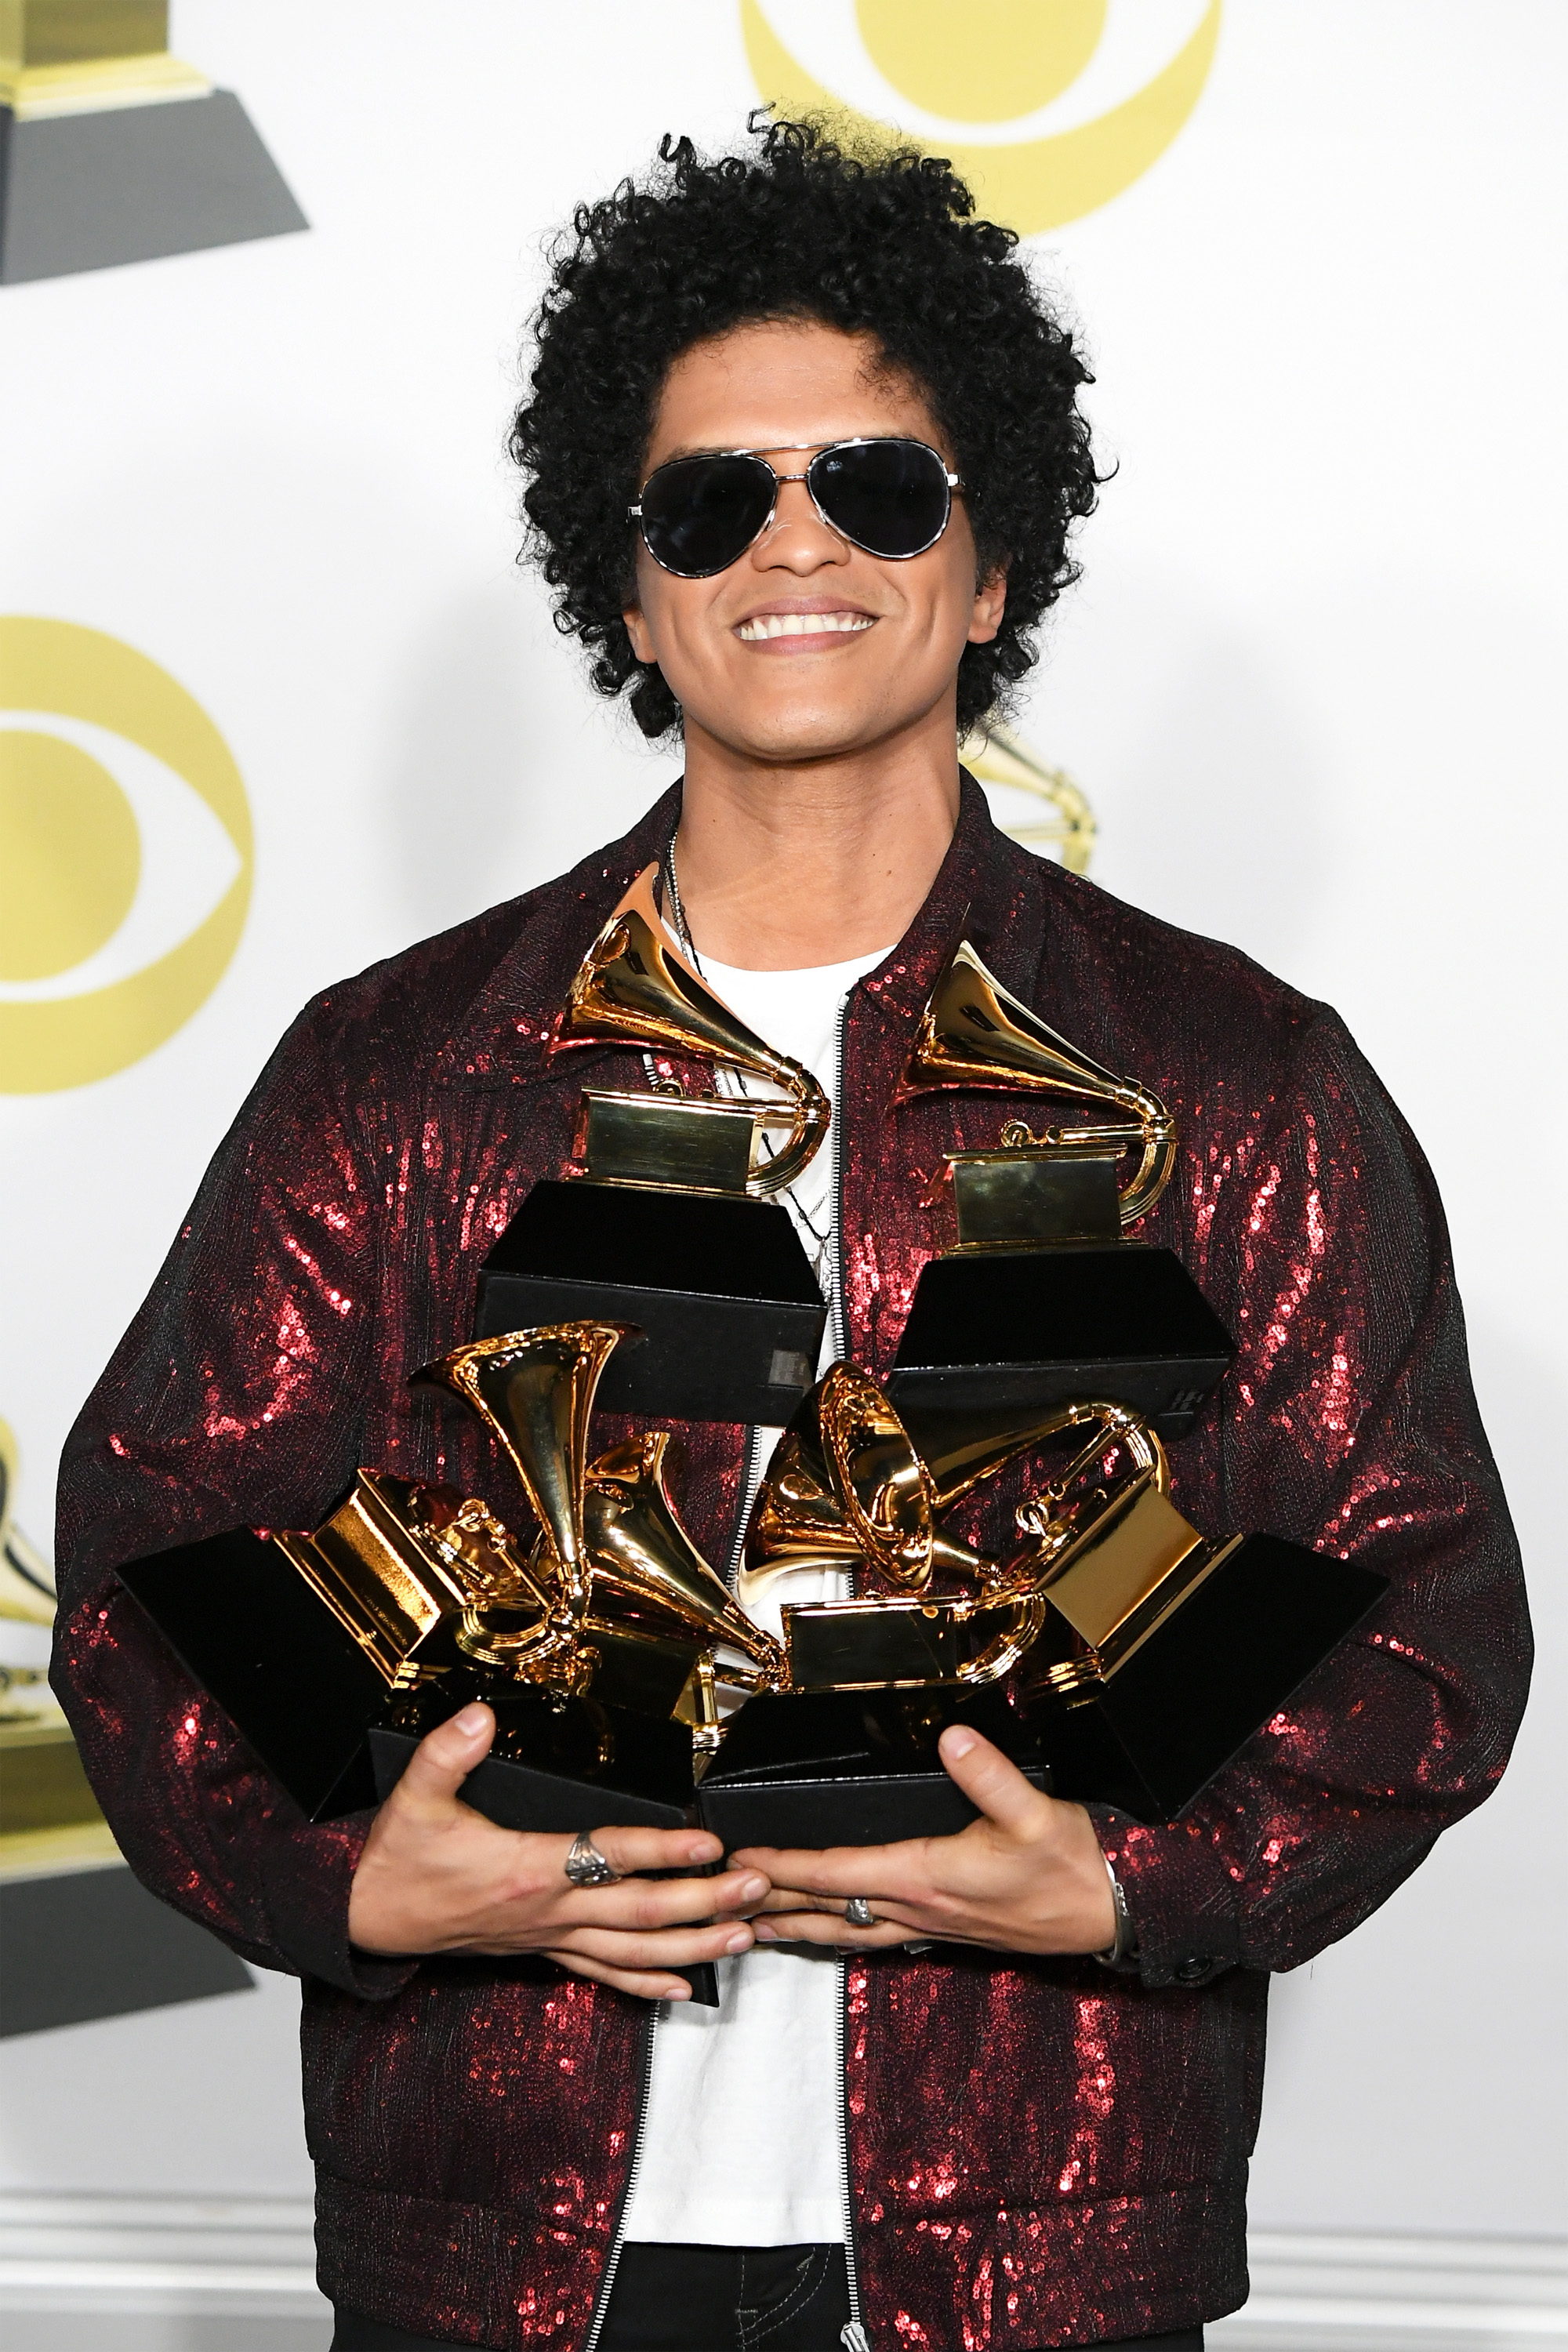 Bruno Mars Is Doing A Big Concert In Hawaii 100.3 R&B and